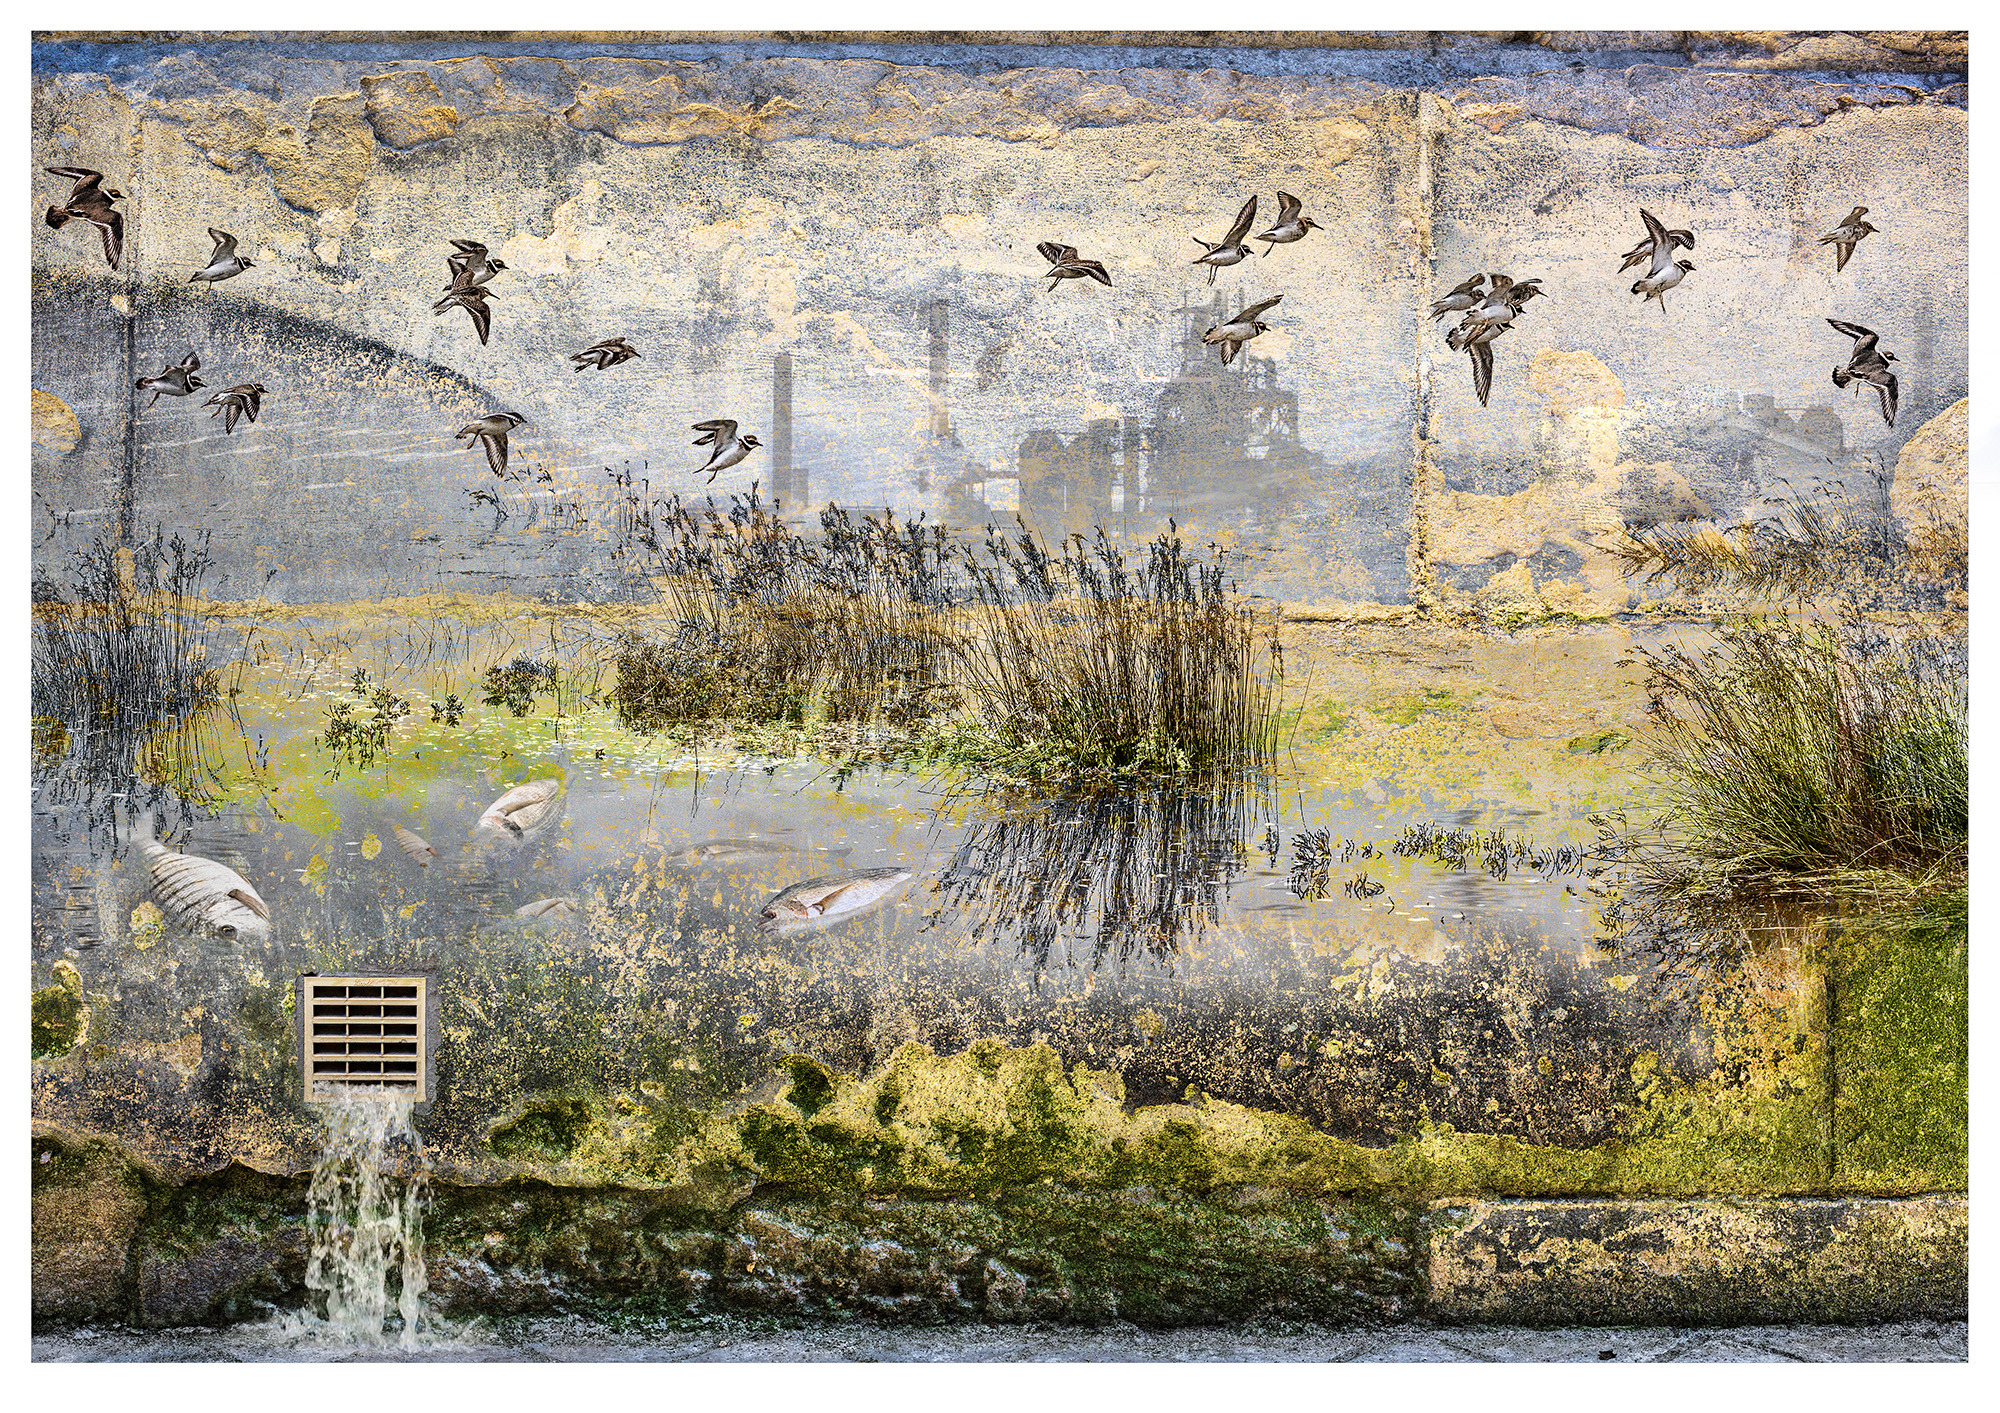 No. 7: A river landscape scene overlaid on textured wall. The river has floating dead fish while overhead birds fly away